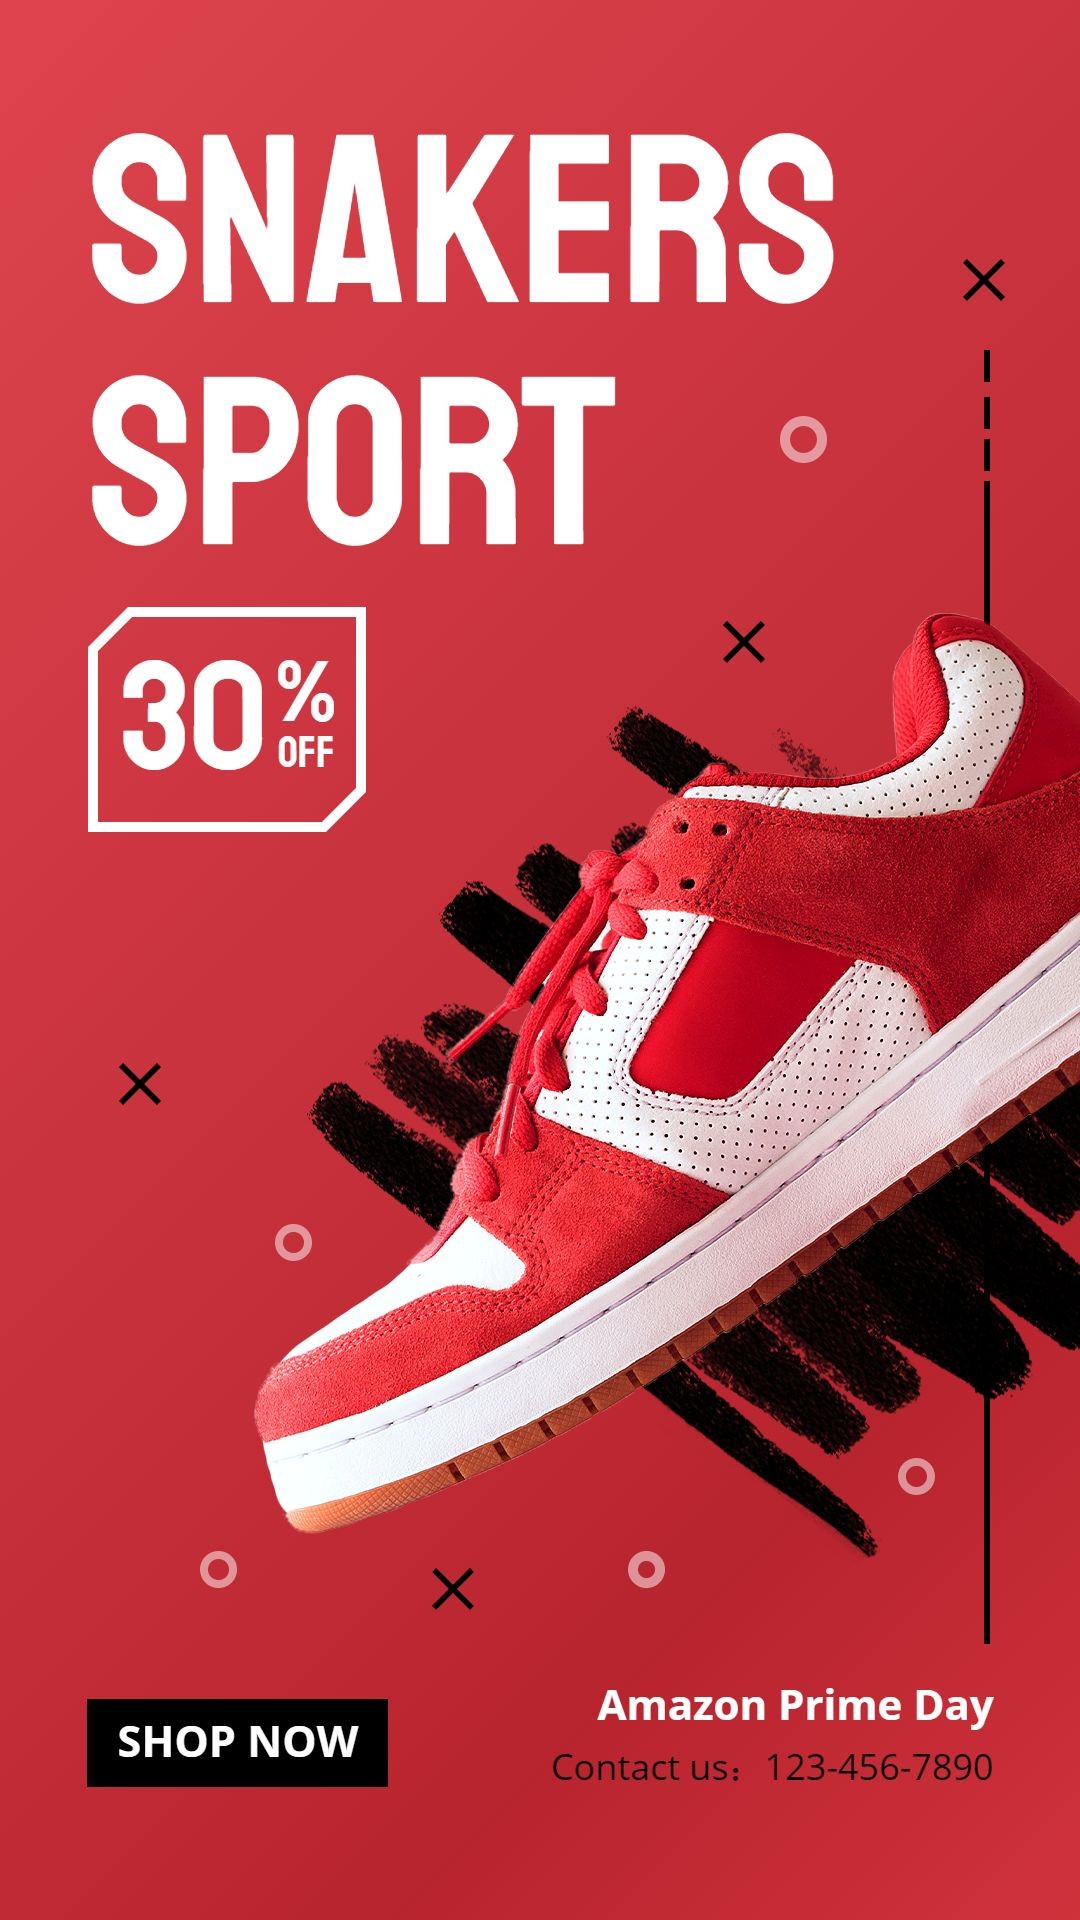 Sneakers Sports Shoes Amazon Prime Day Discount Sale Promotion Ecommerce Story预览效果